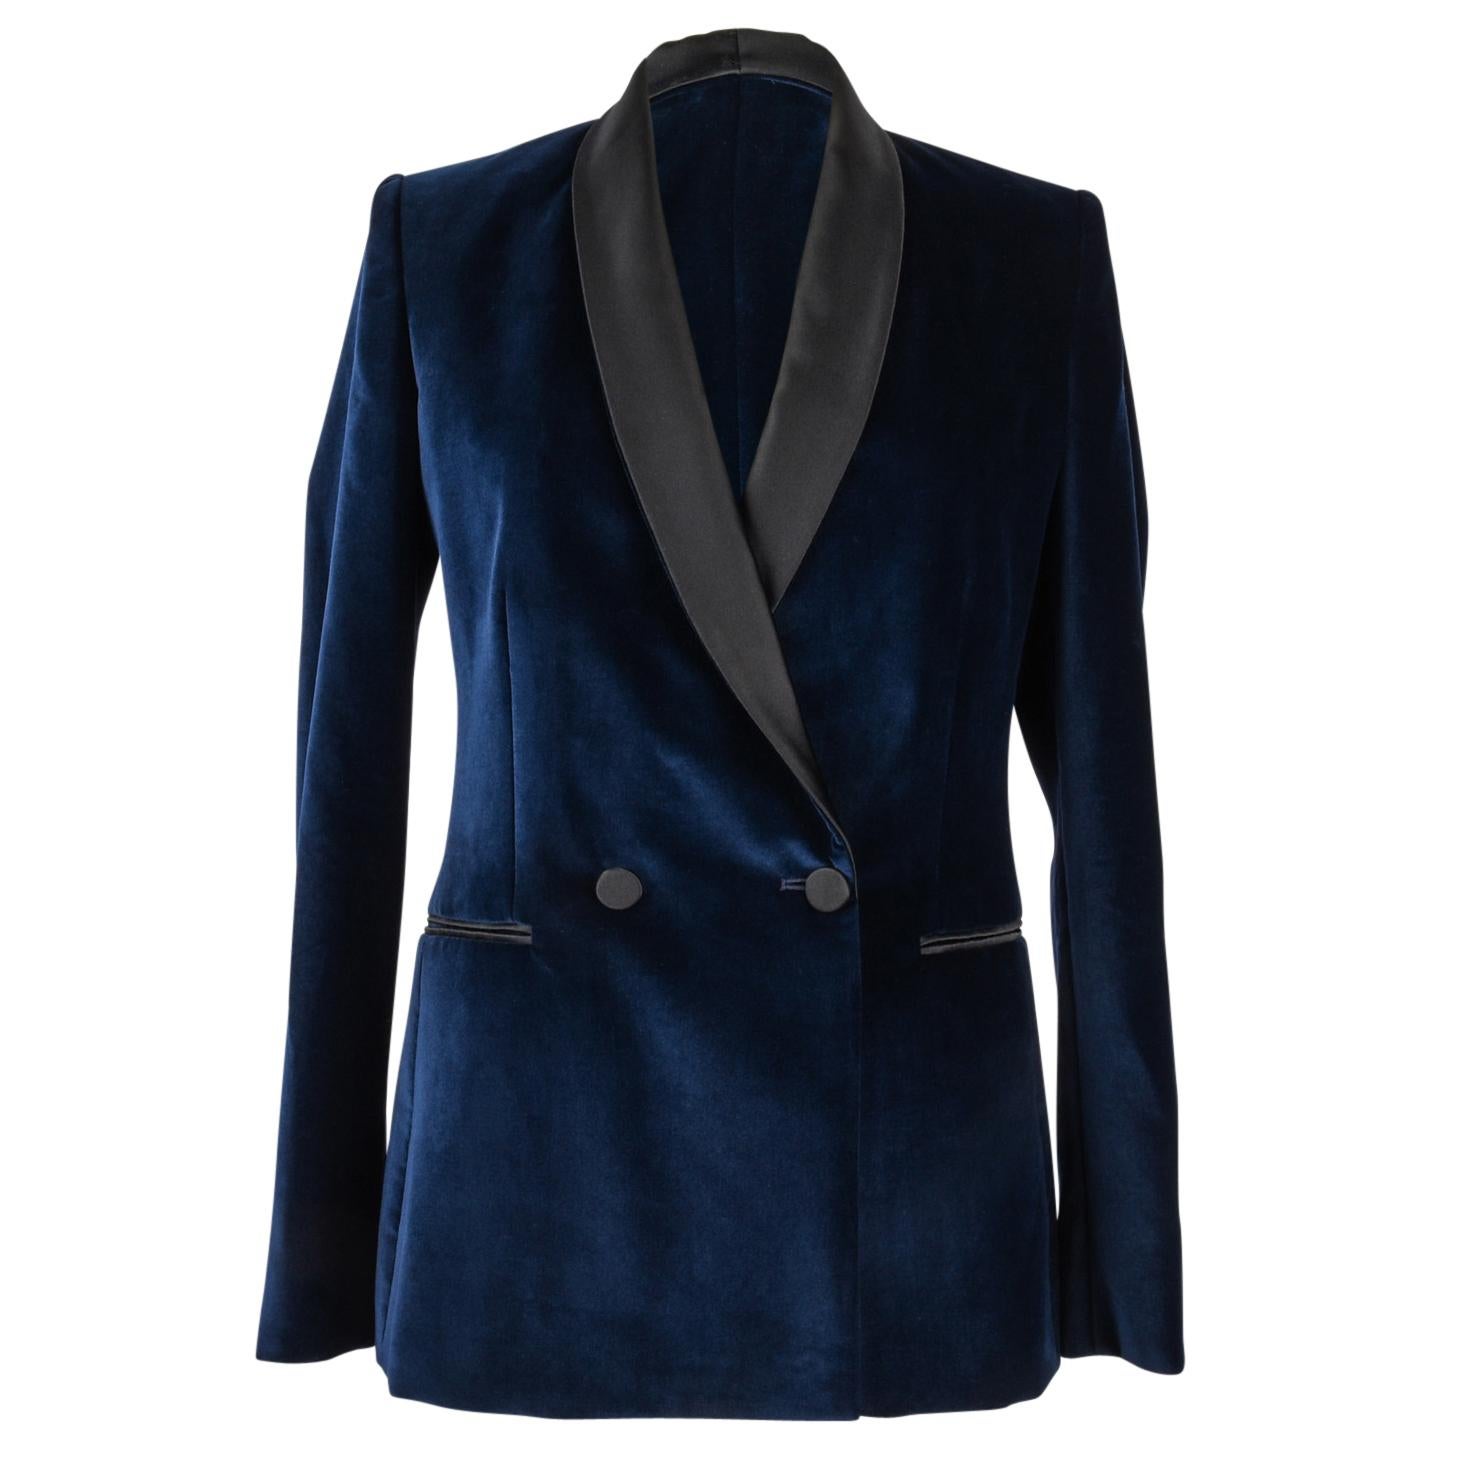 Guaranteed authentic Stella McCartney navy blue velvet tuxedo pant suit. 
Double breast jacket with black contrasting lapels, covered buttons and slot pockets.
Jacket has 4 covered working buttons on cuff. 
Rear vent. 
Jacket is in excellent